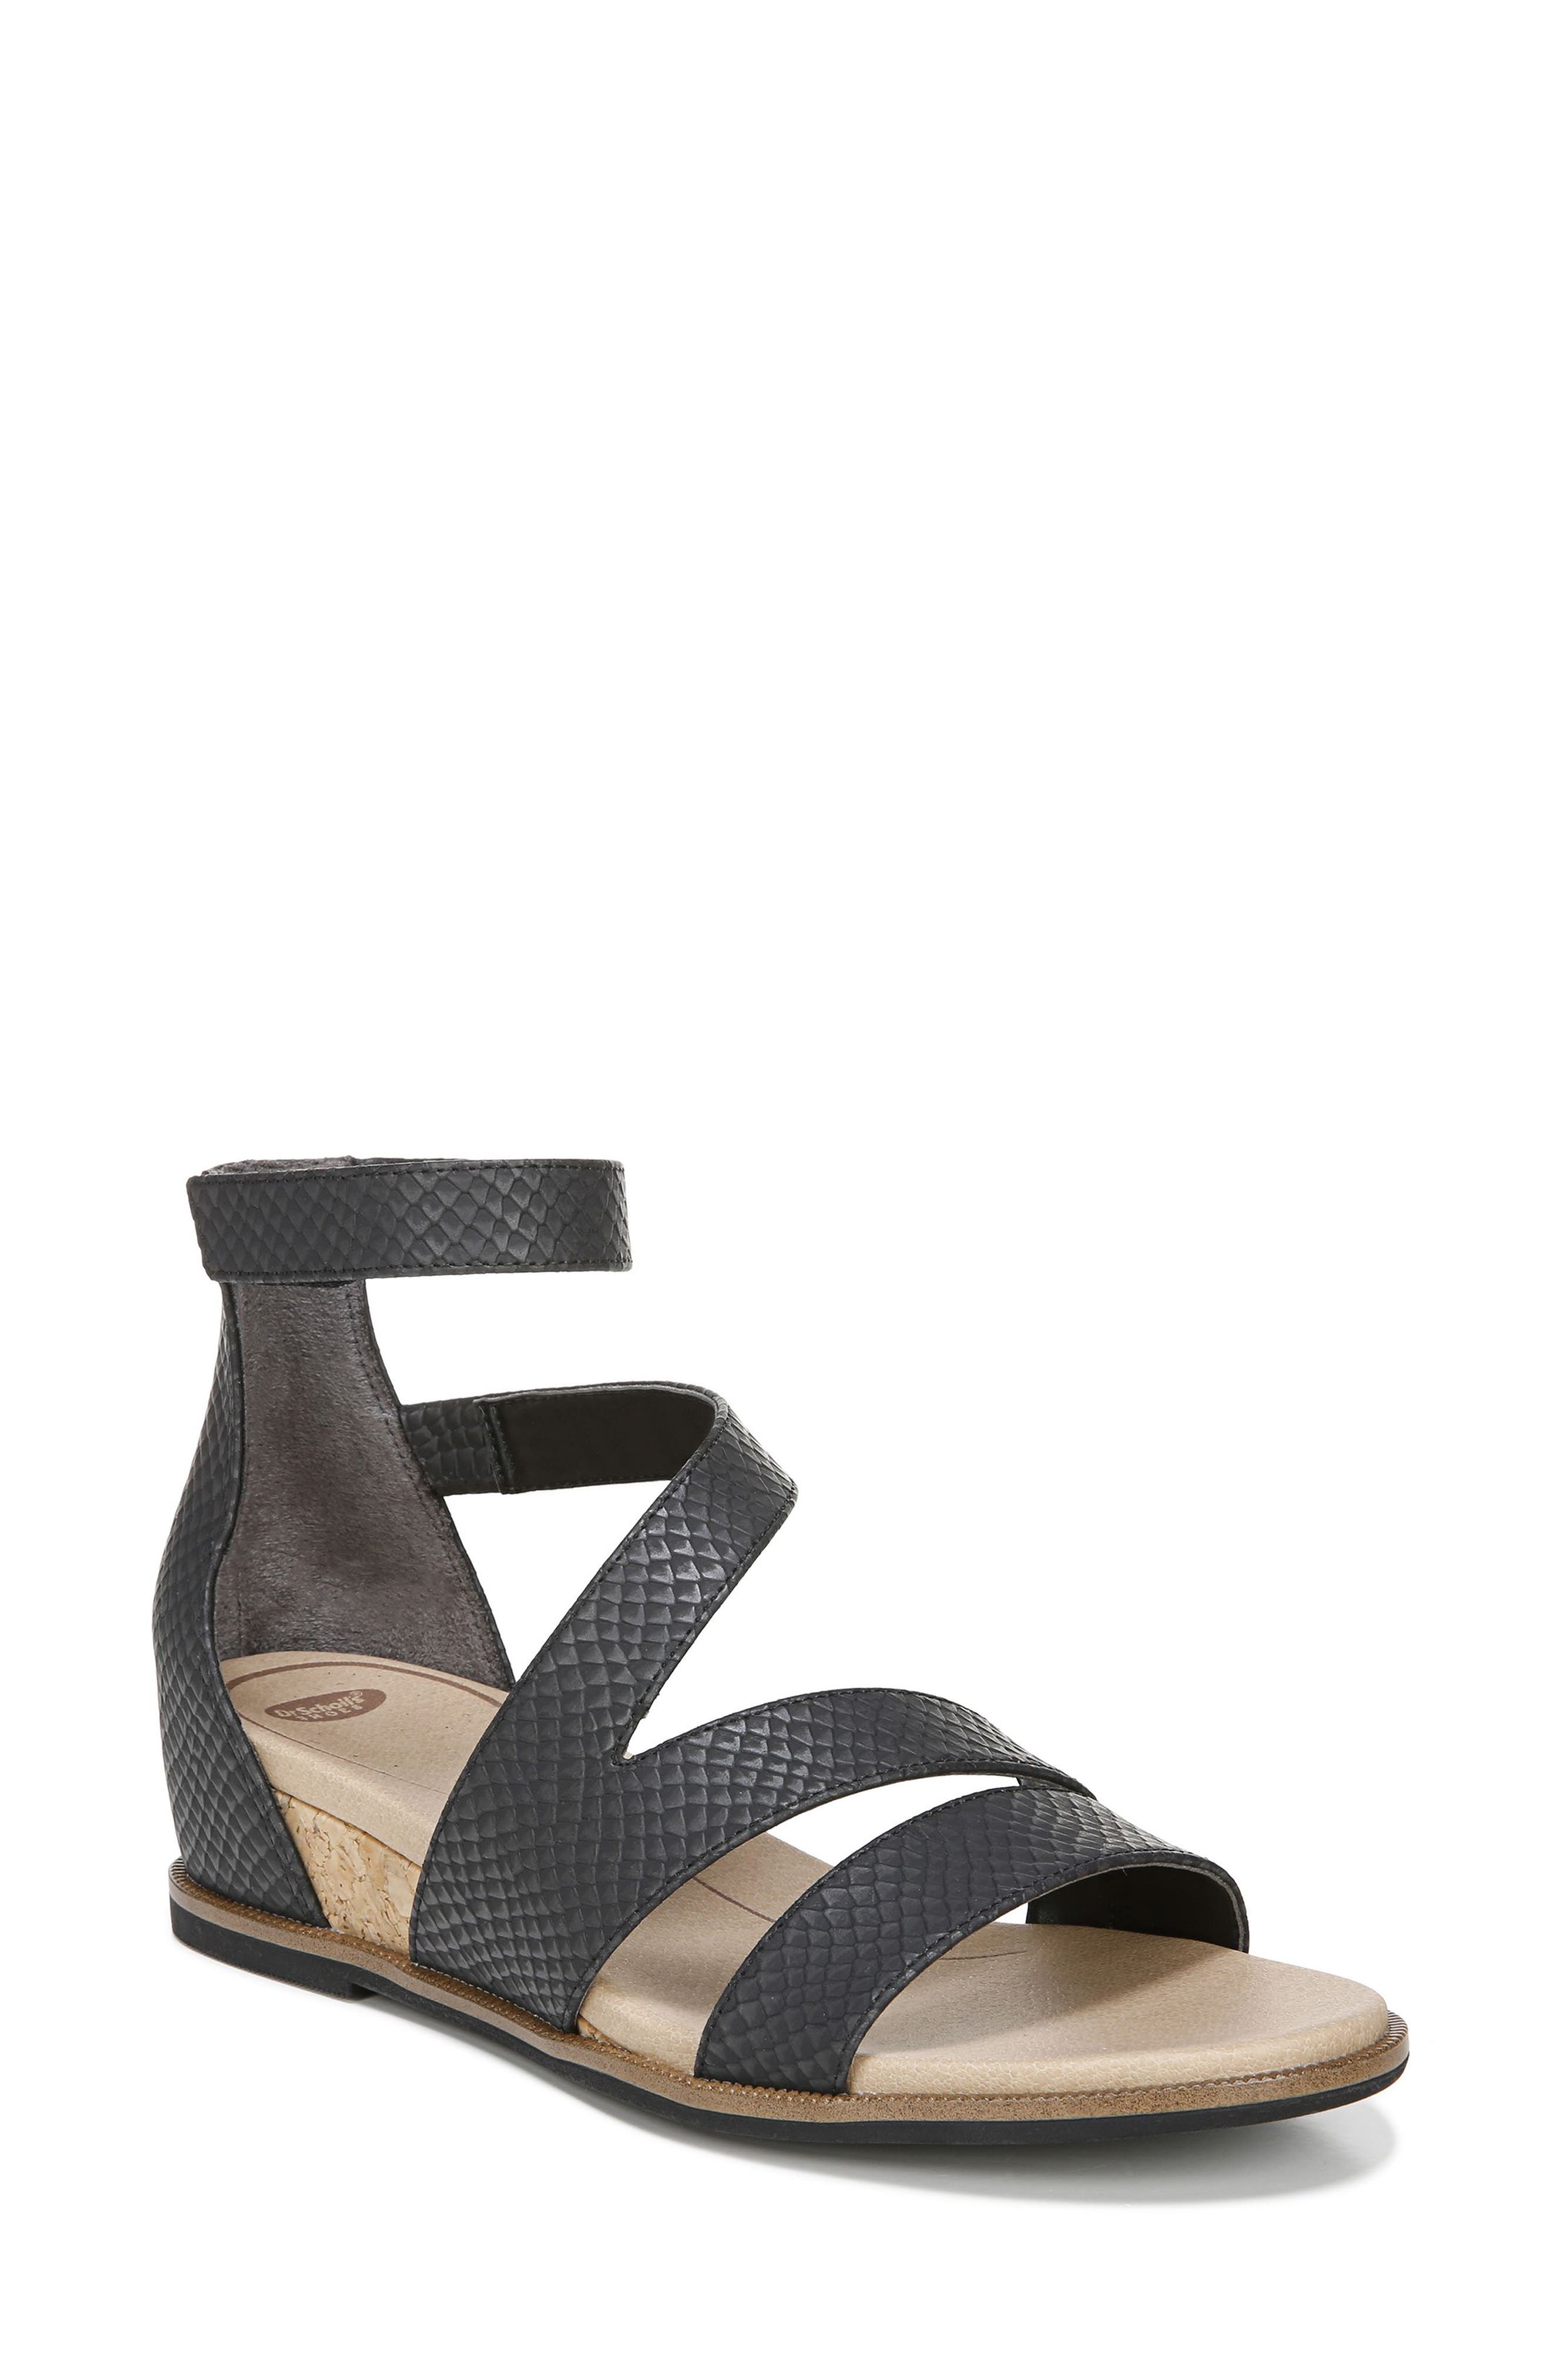 dr scholl's wedges